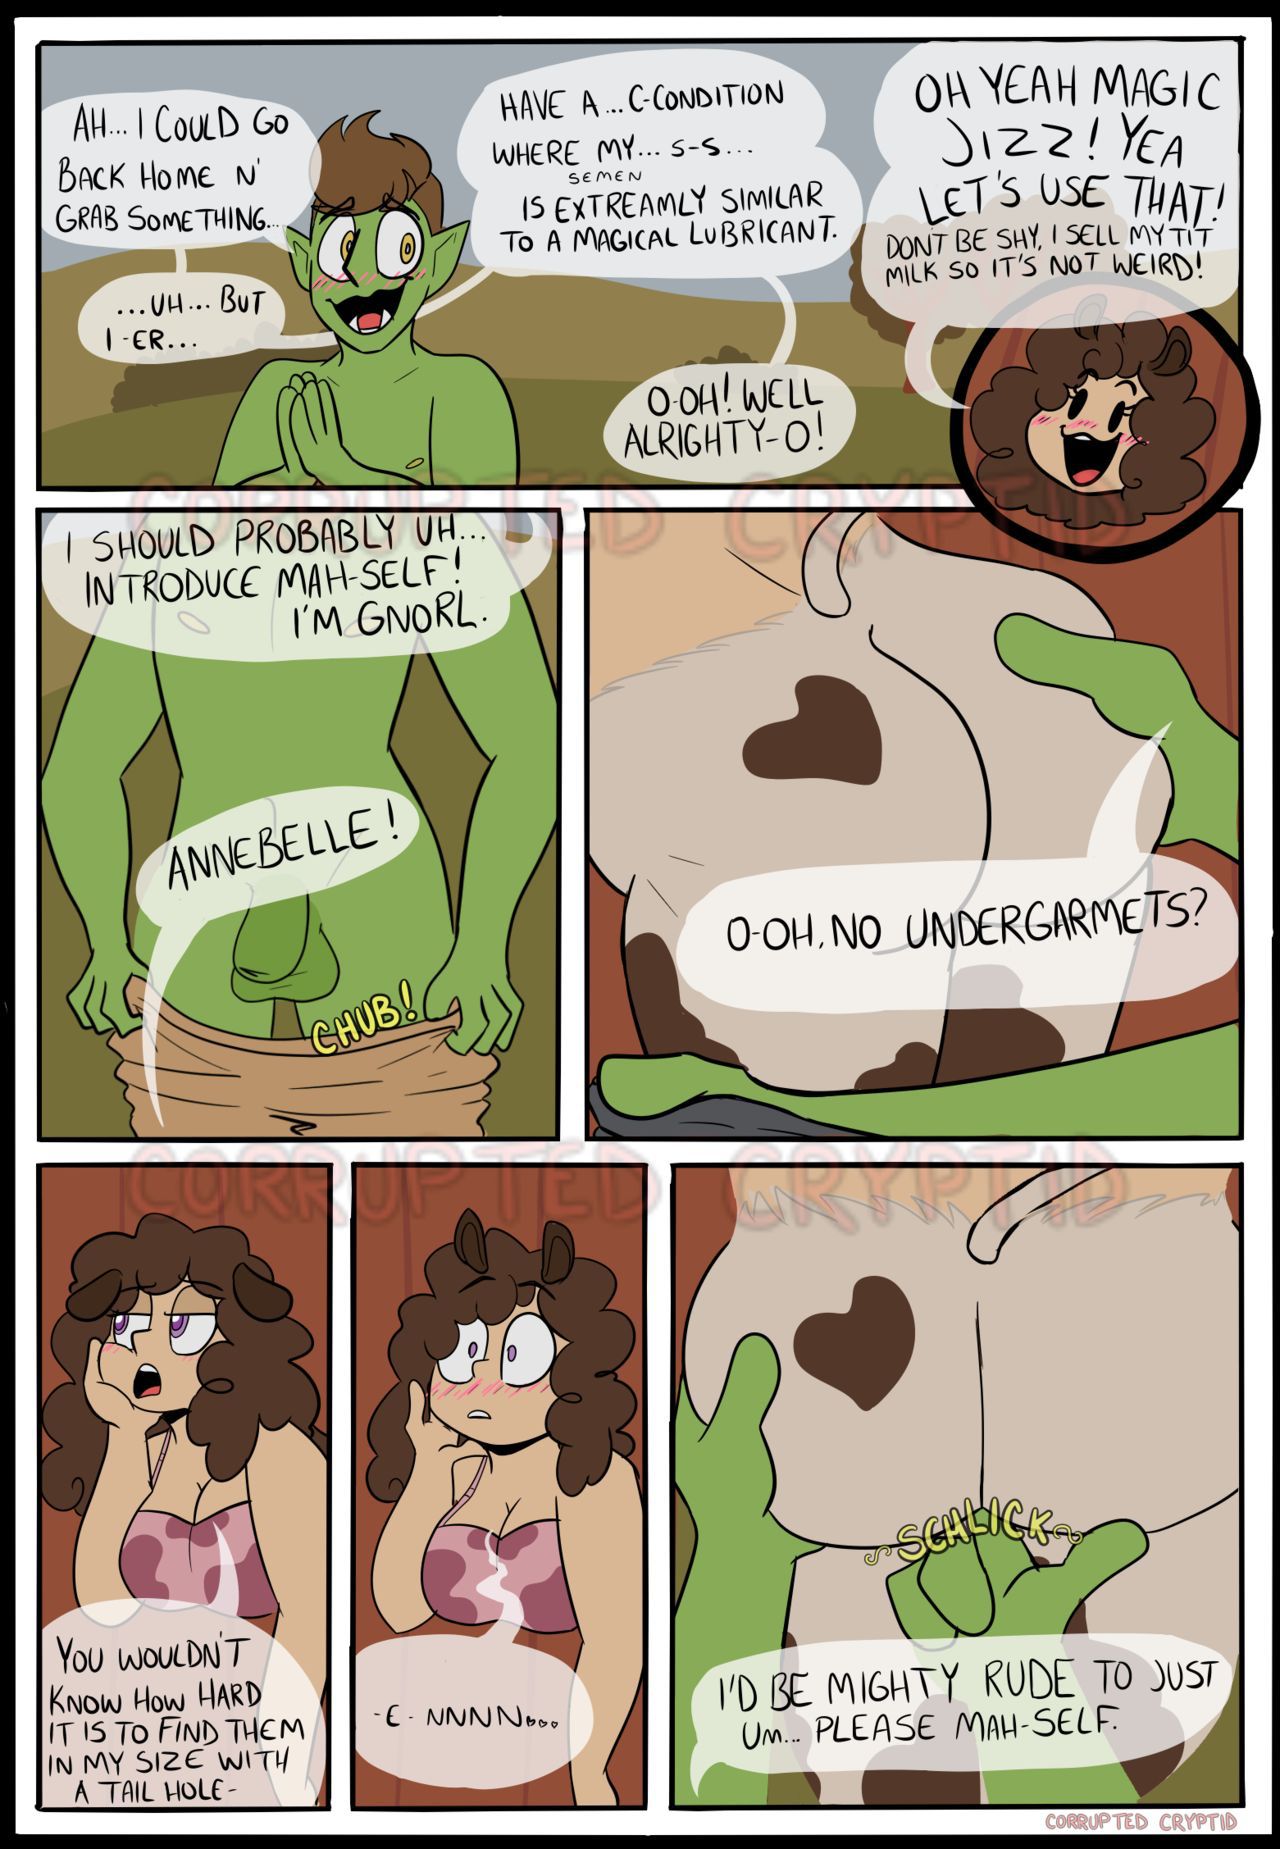 [CorruptedCryptid] Annebelle's Adventure (NSFW Comic) (Finished) 4